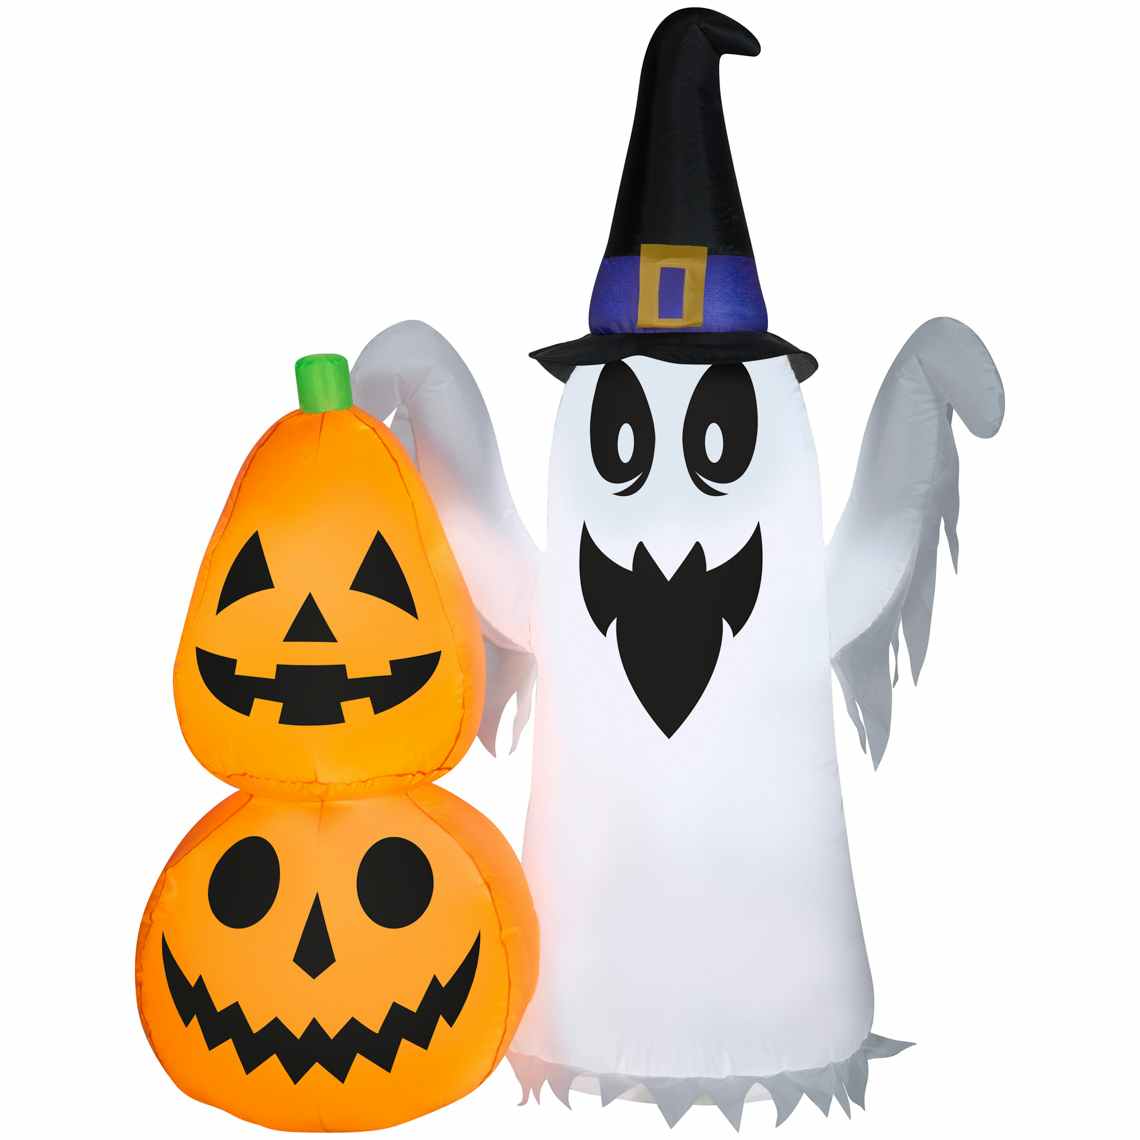 stock photo of inflatable ghost and pumpkins on white background